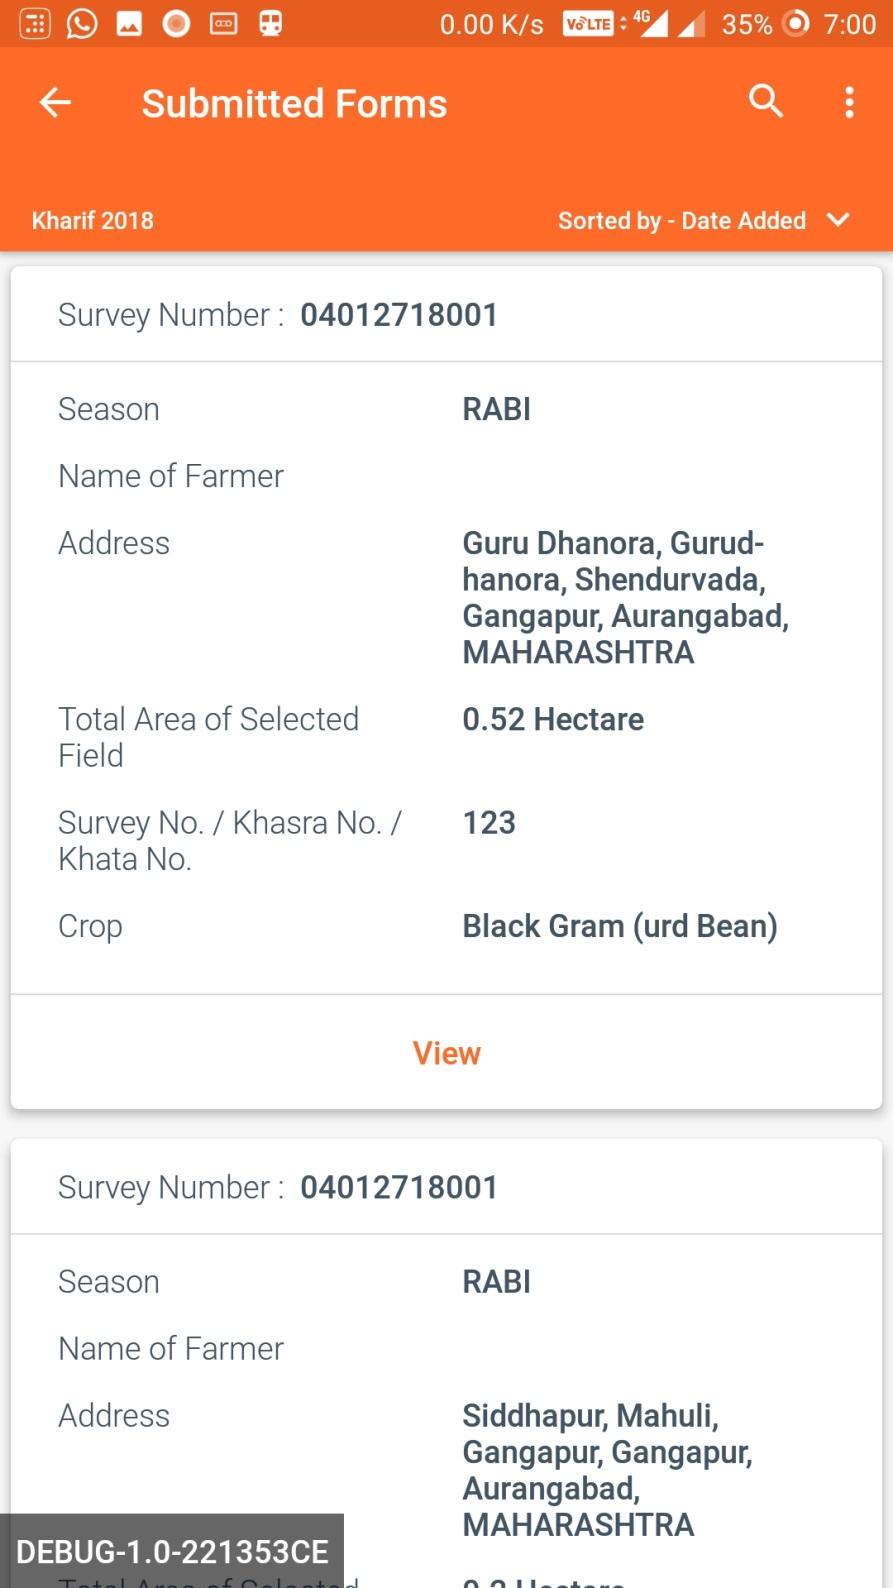 The user can filter the submitted forms based on Season and year and also sort the forms based on farmer name, Crop